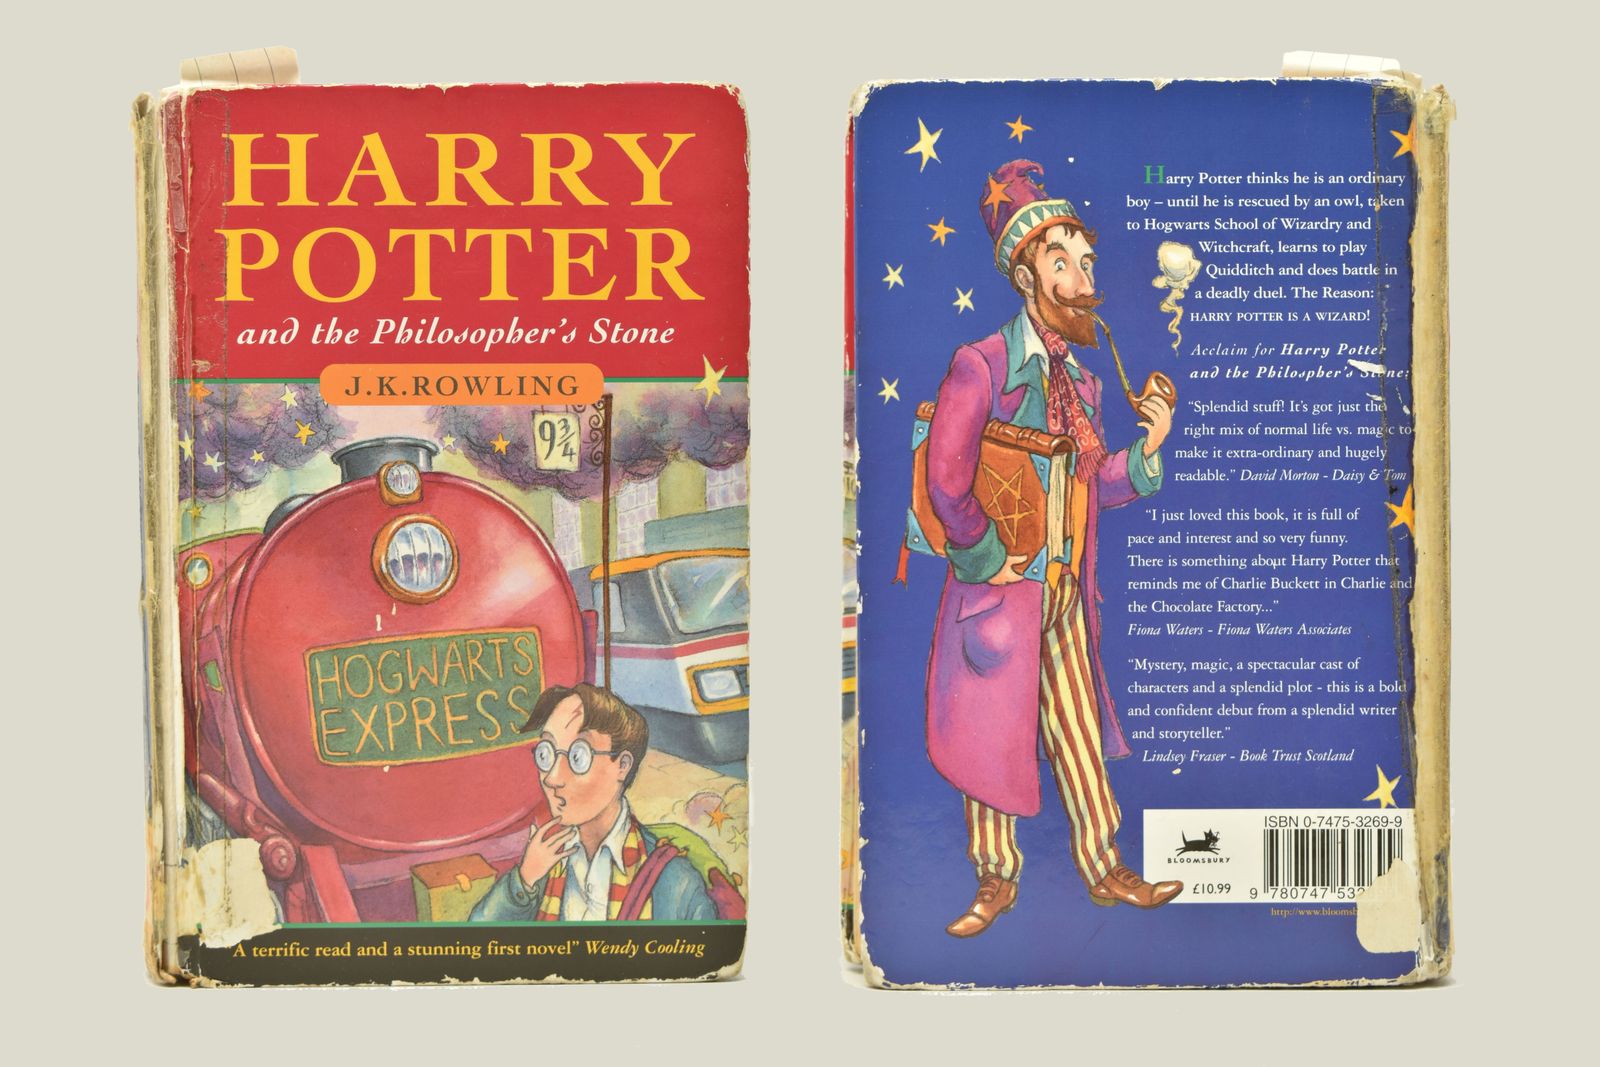 Bought for 38 Cents, Rare Harry Potter Book Could Sell for Thousands, Smart News